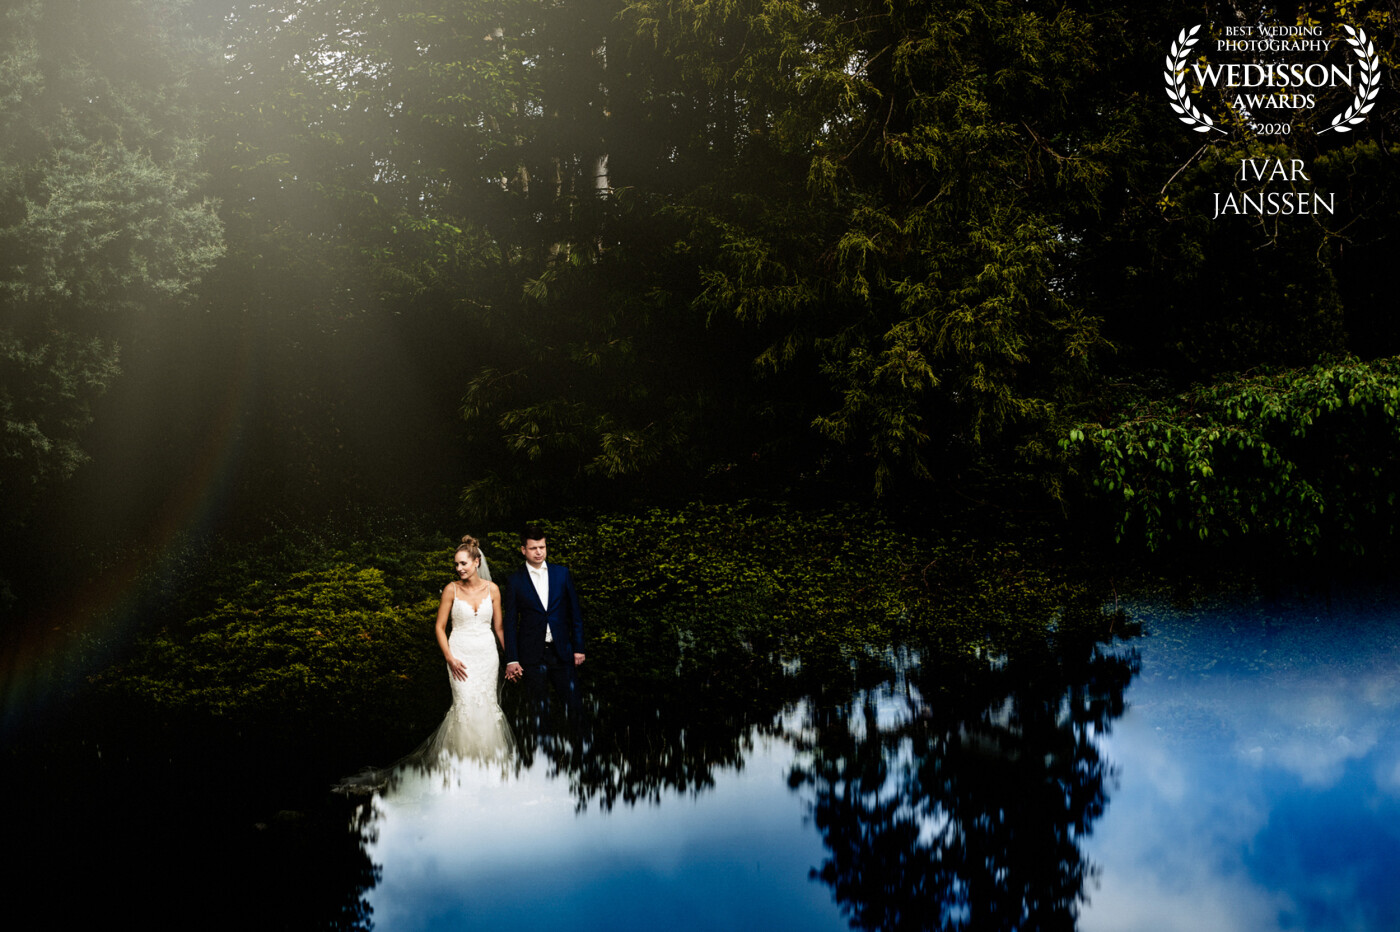 A lovely couple in the Netherlands. I would create a photo where it looks that the wedding dress seems to get one with water. With reflection, I created this photo.